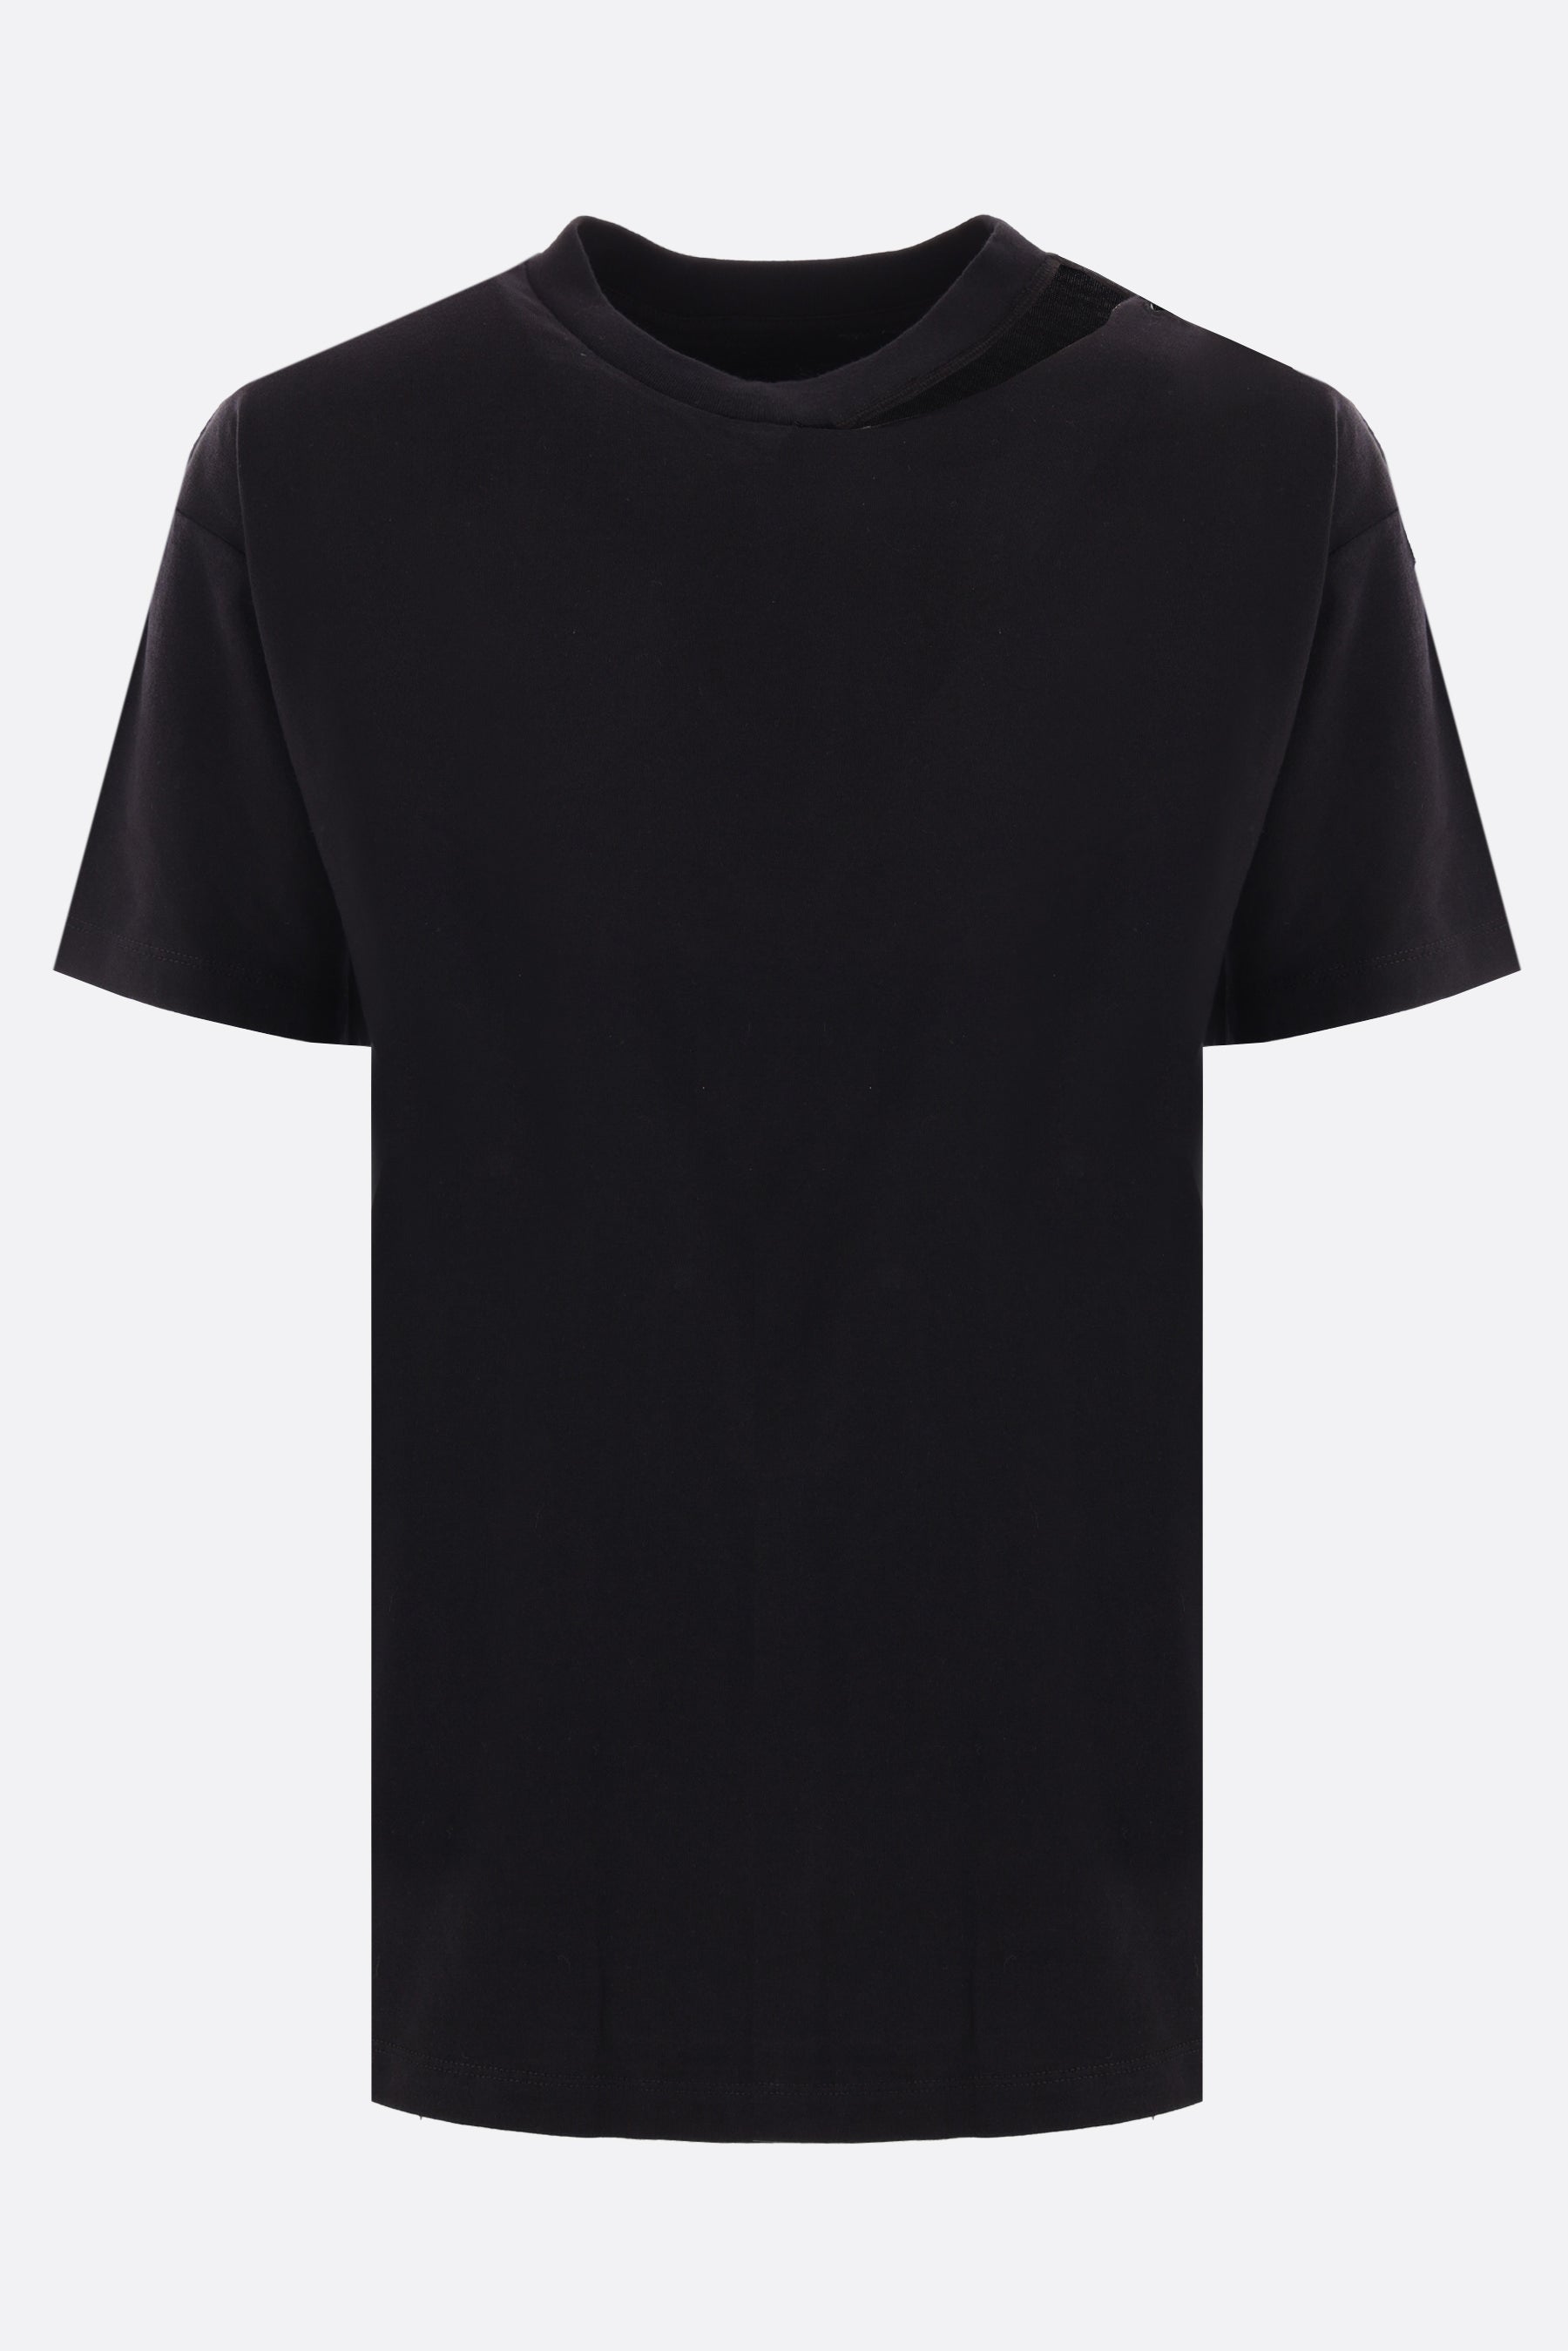 cotton t-shirt with cut-out and safety pin